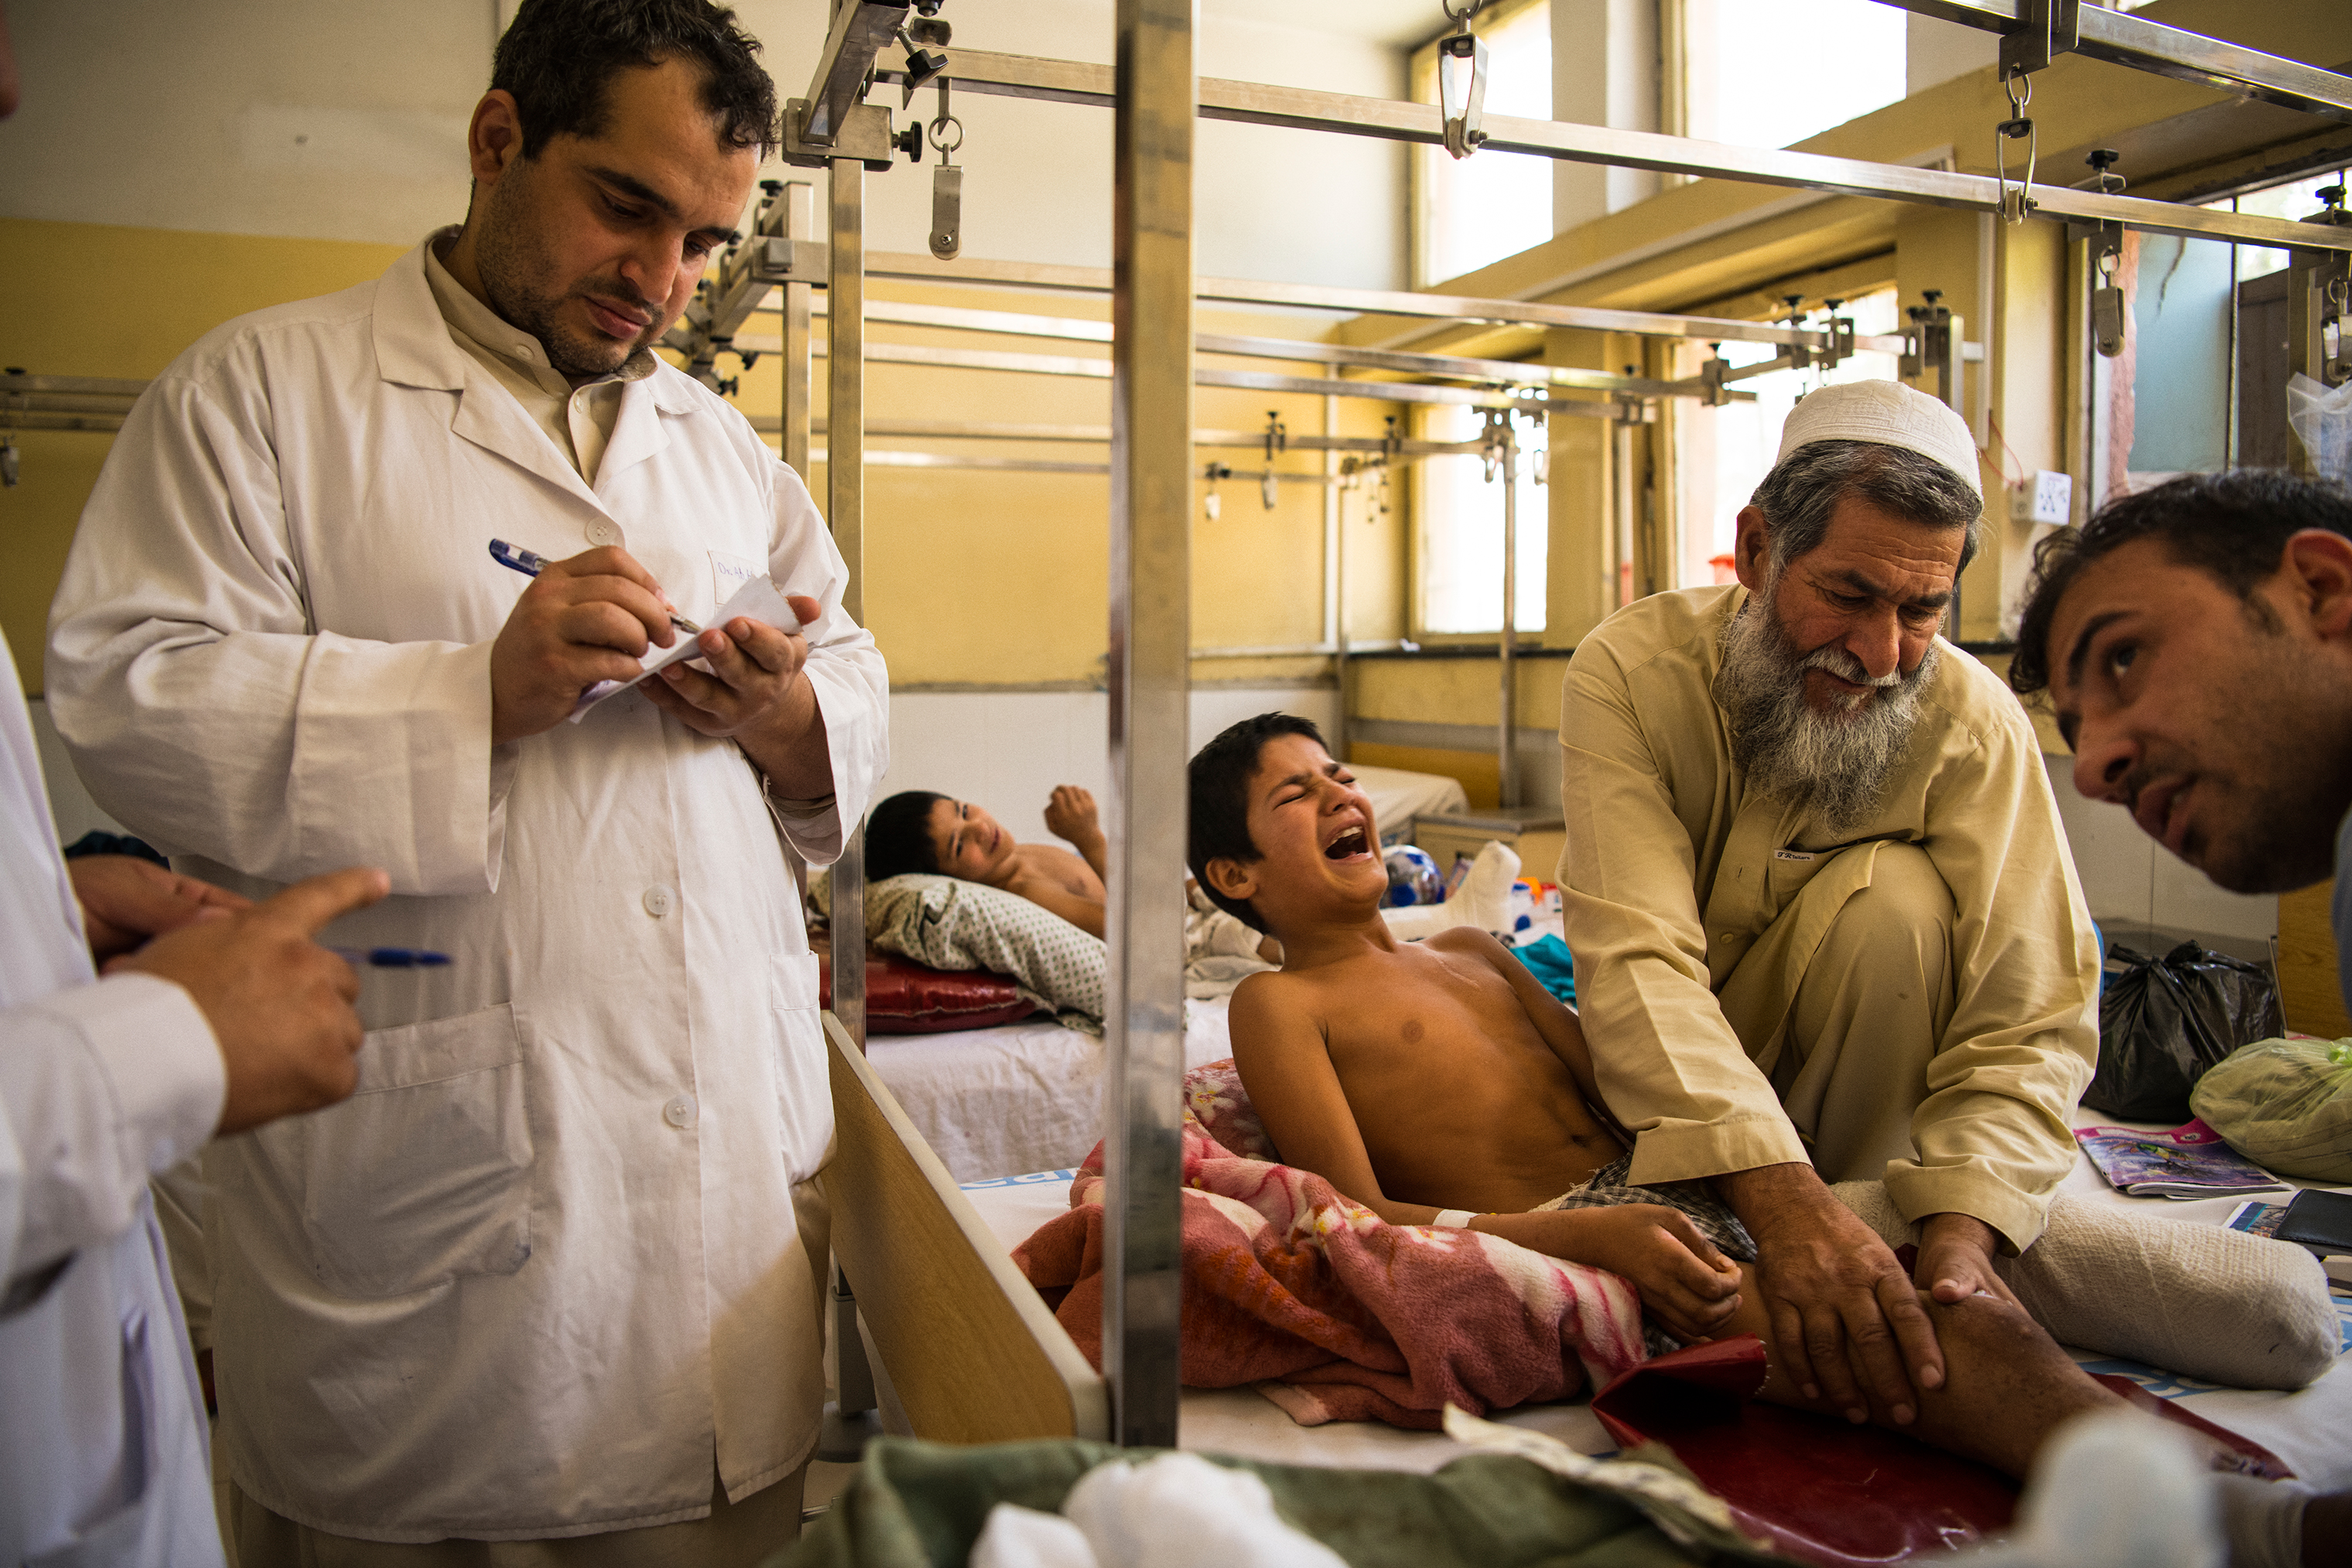 Abdul Rashid's wounds are cleaned, drained and redressed prior to he and his brothers' discharge from Nangarhar Regional Hospital after a month-long stay. (Andrew Quilty for TIME)